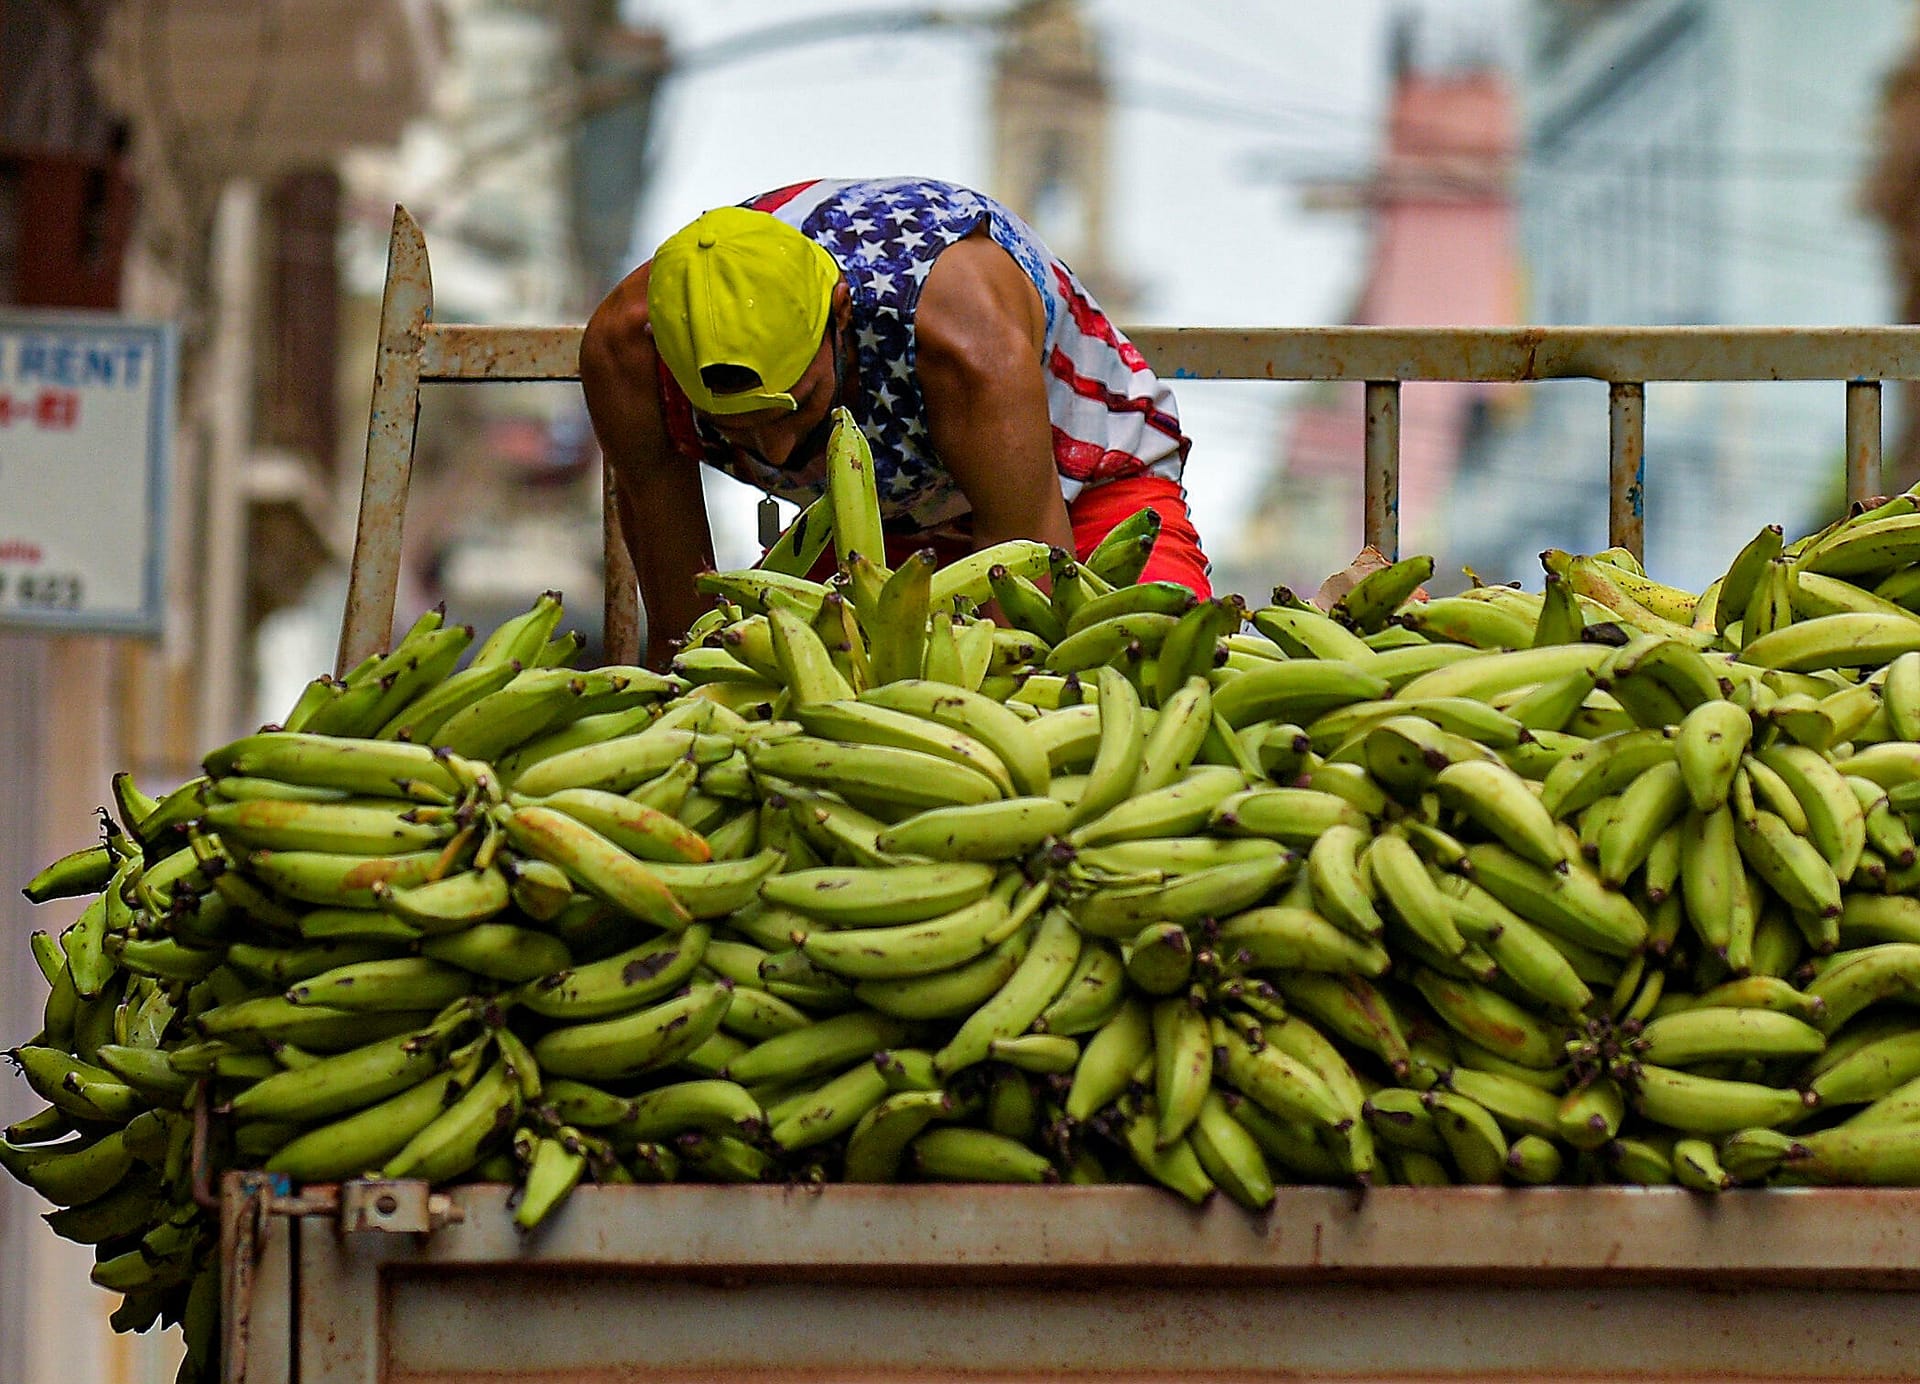 A Cuban unloads a load of bananas to sell in Havana, July 15, 2021.